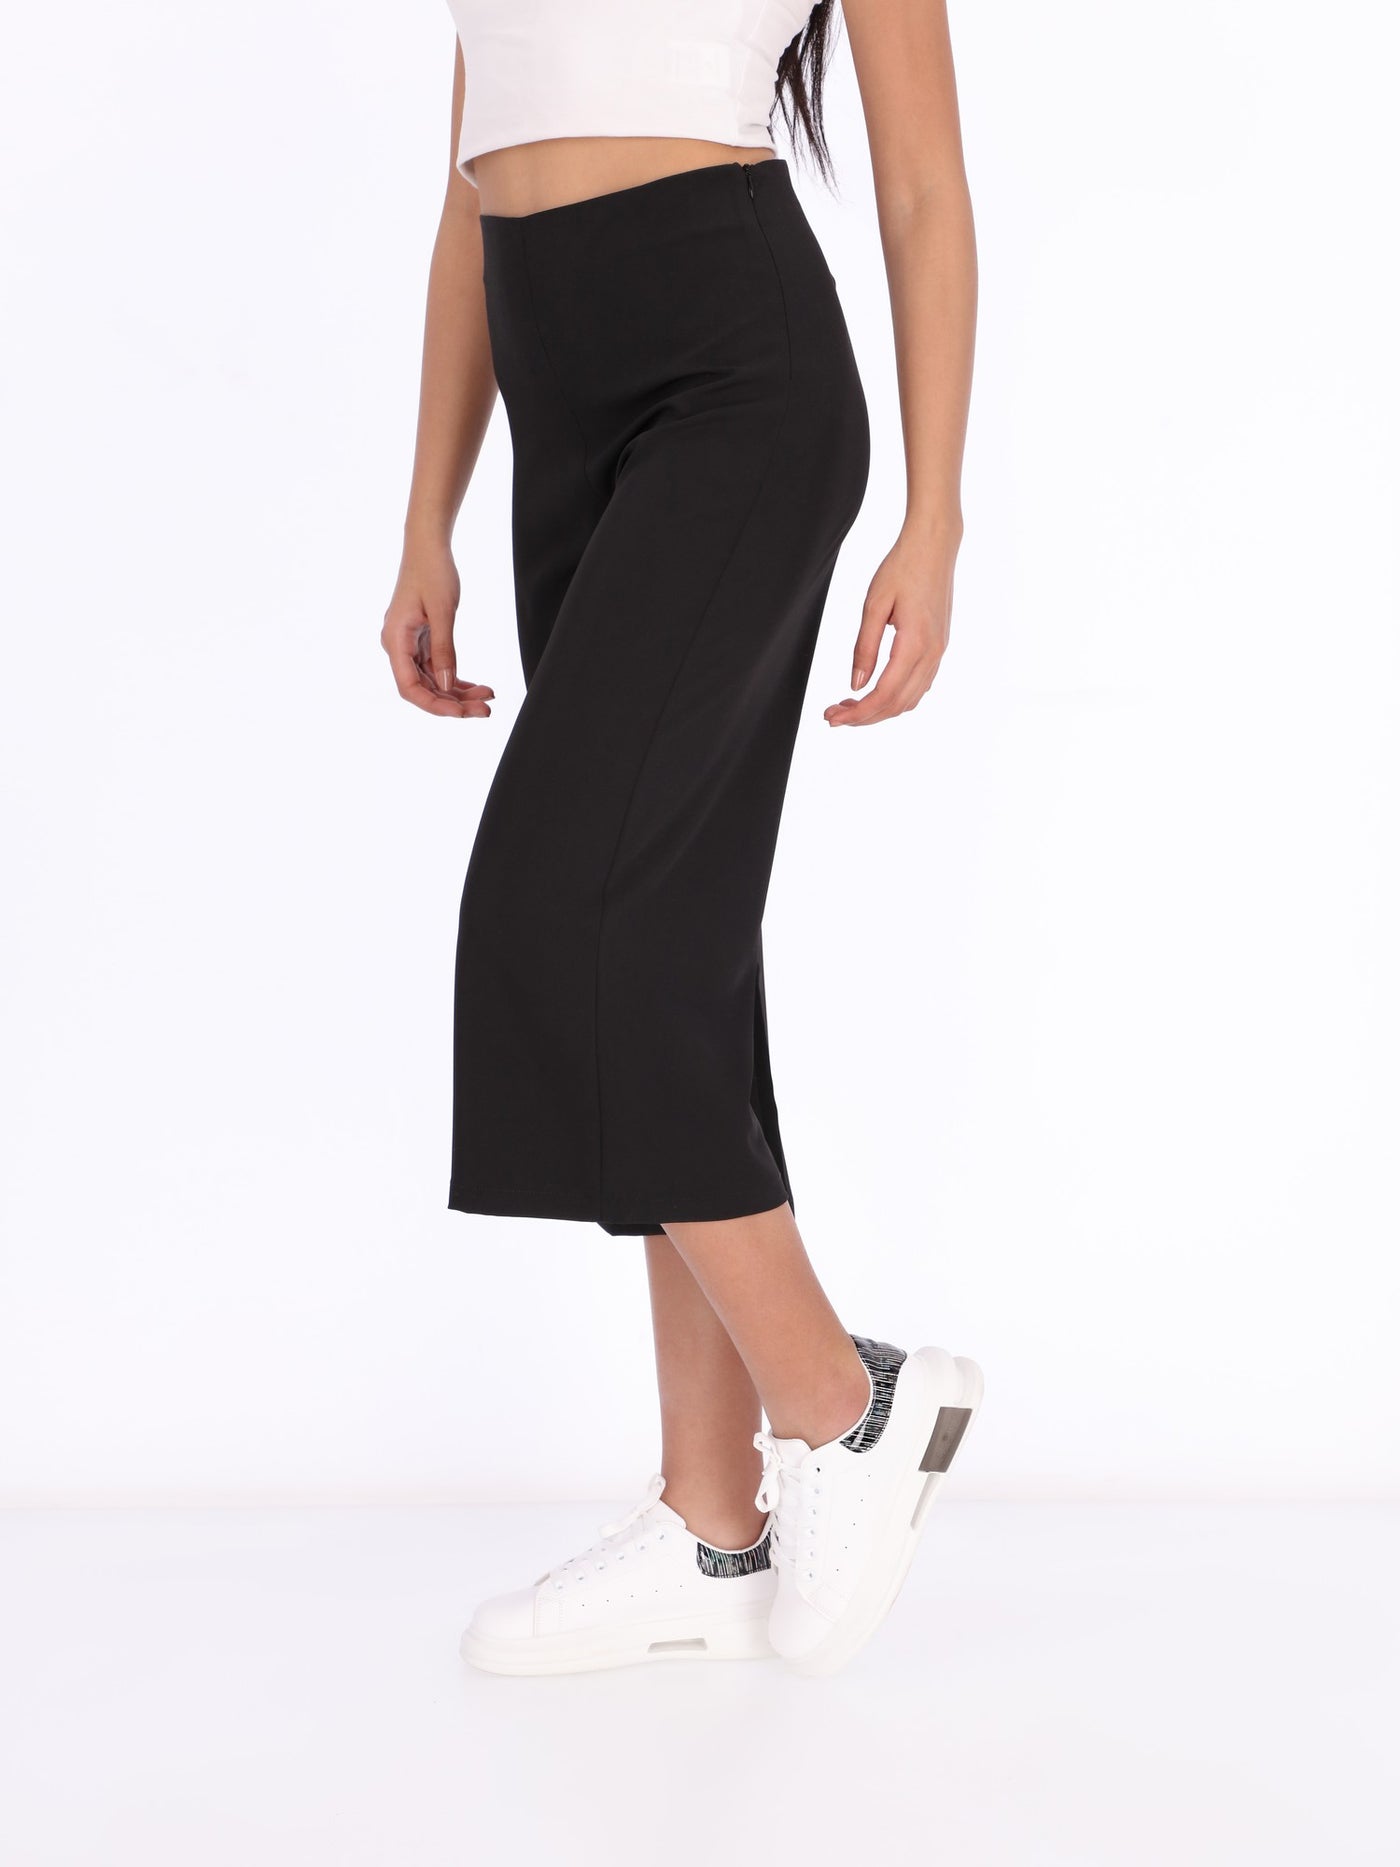  OR Women's Basic Culottes